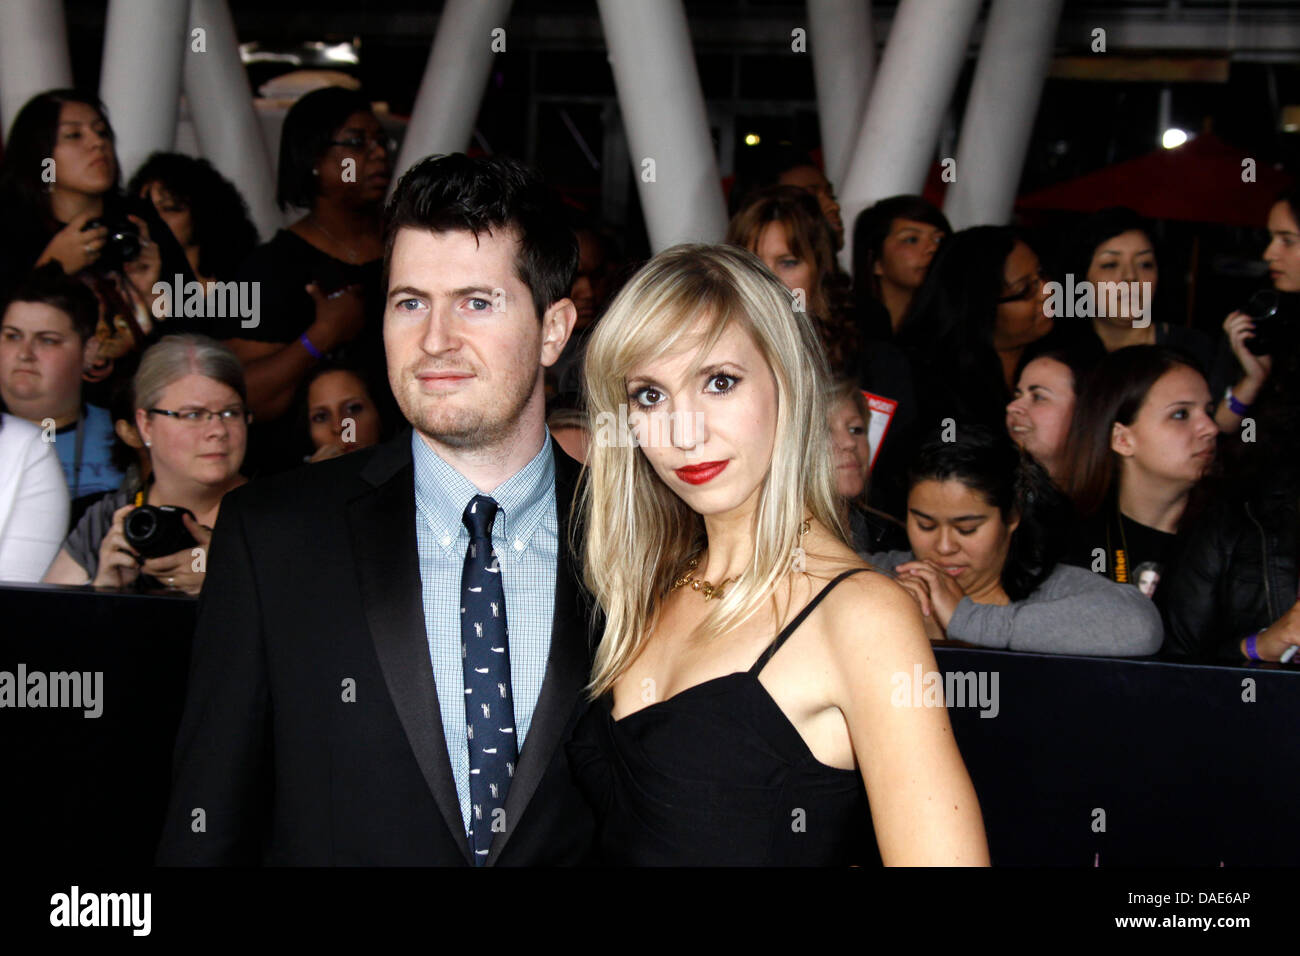 Musicians Leonard Jackson and Laura Jane Scott of 'Imperial Mammoth' arrive for the World Premiere of 'The Twilight Saga: Breaking Dawn - Part 1' at Nokia Theatre at L.A. Live in Los Angeles, USA, 15 November 2011. Photo: Hubert Boesl Stock Photo